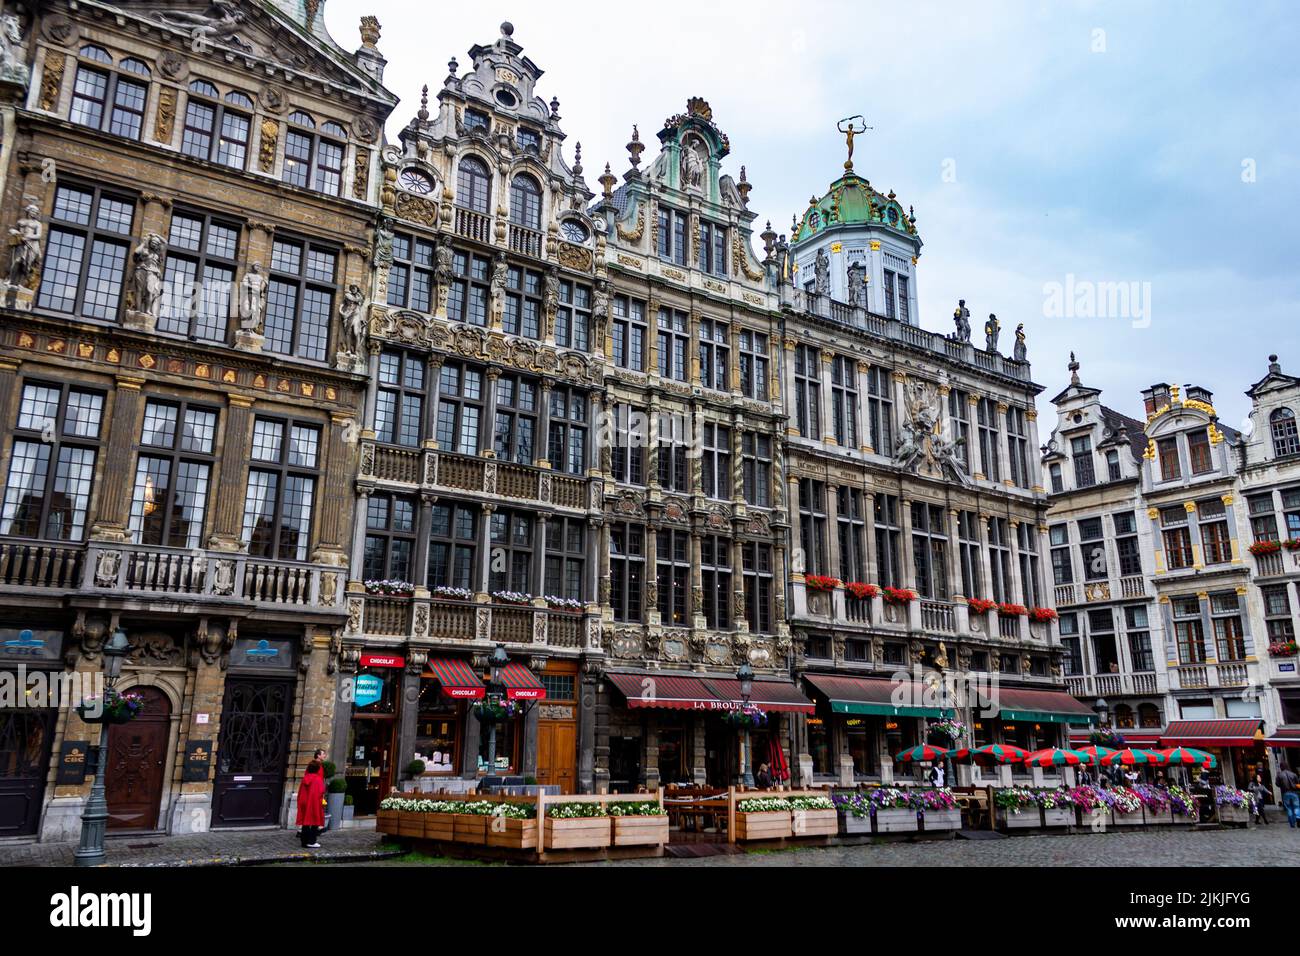 The Grand Place with its guild halls historical buildings, Brussels, Belgium, Europe Stock Photo